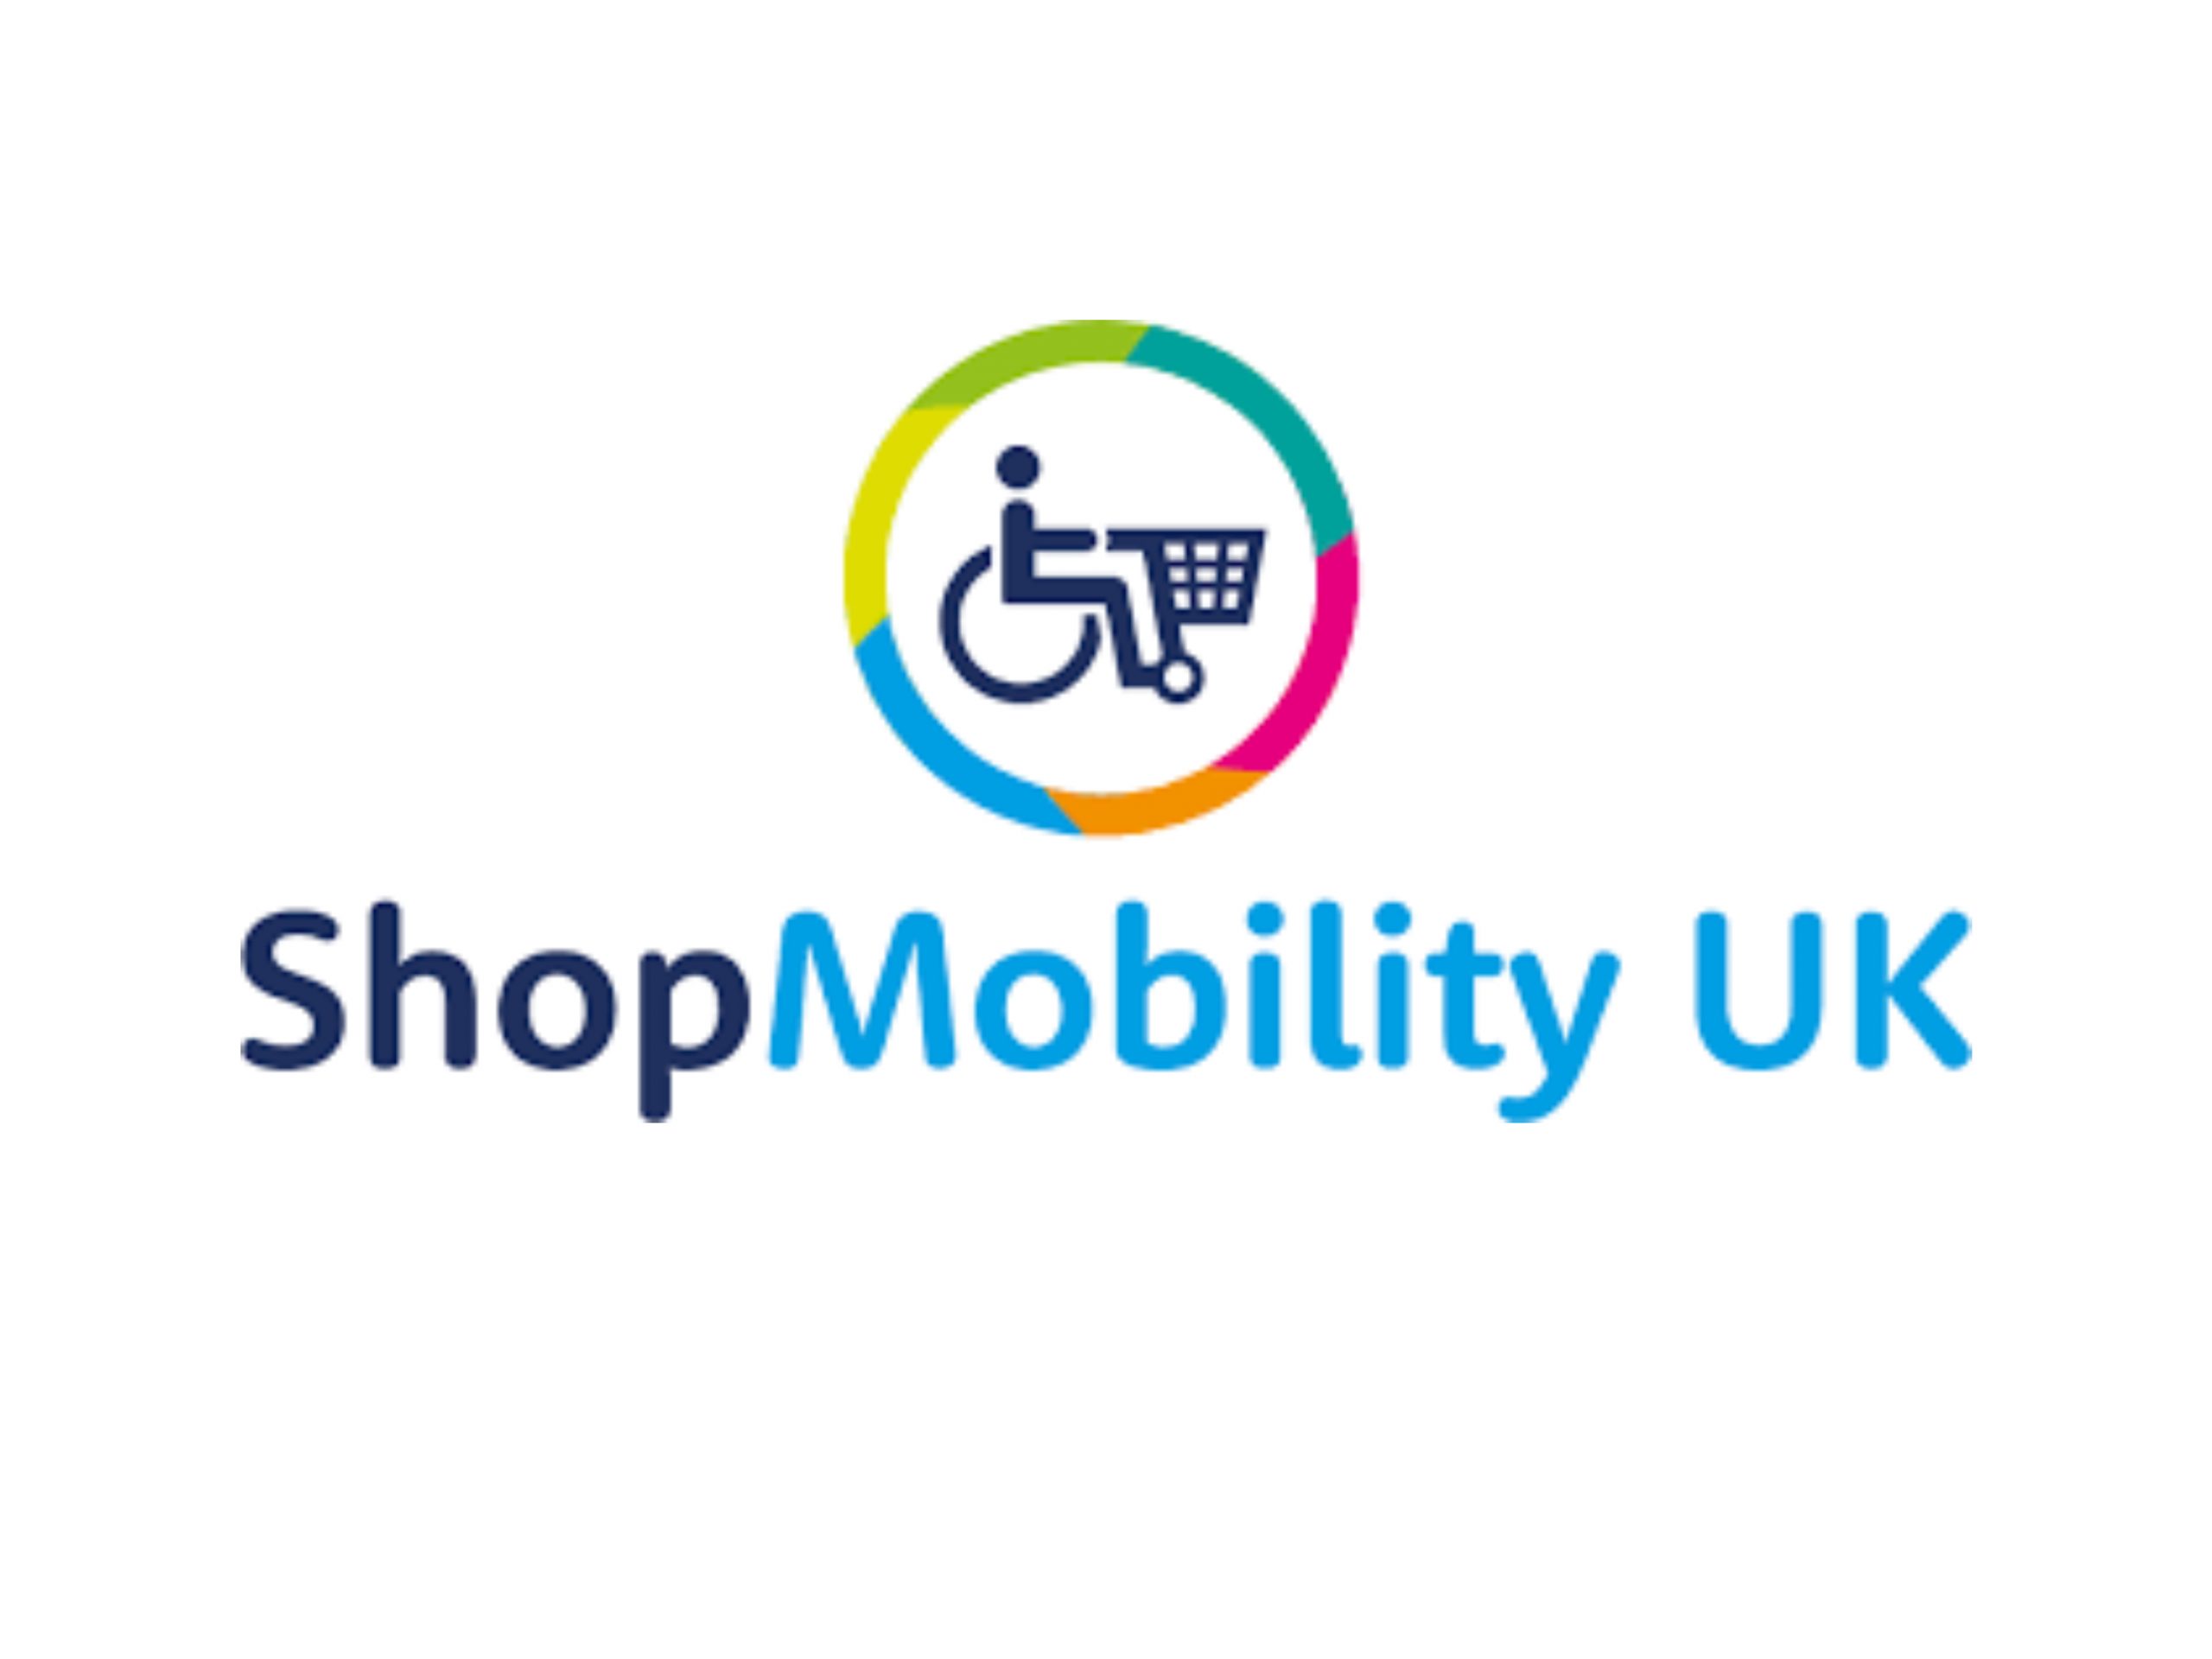 ShopMobility UK launches new accessible website for customers and scheme members